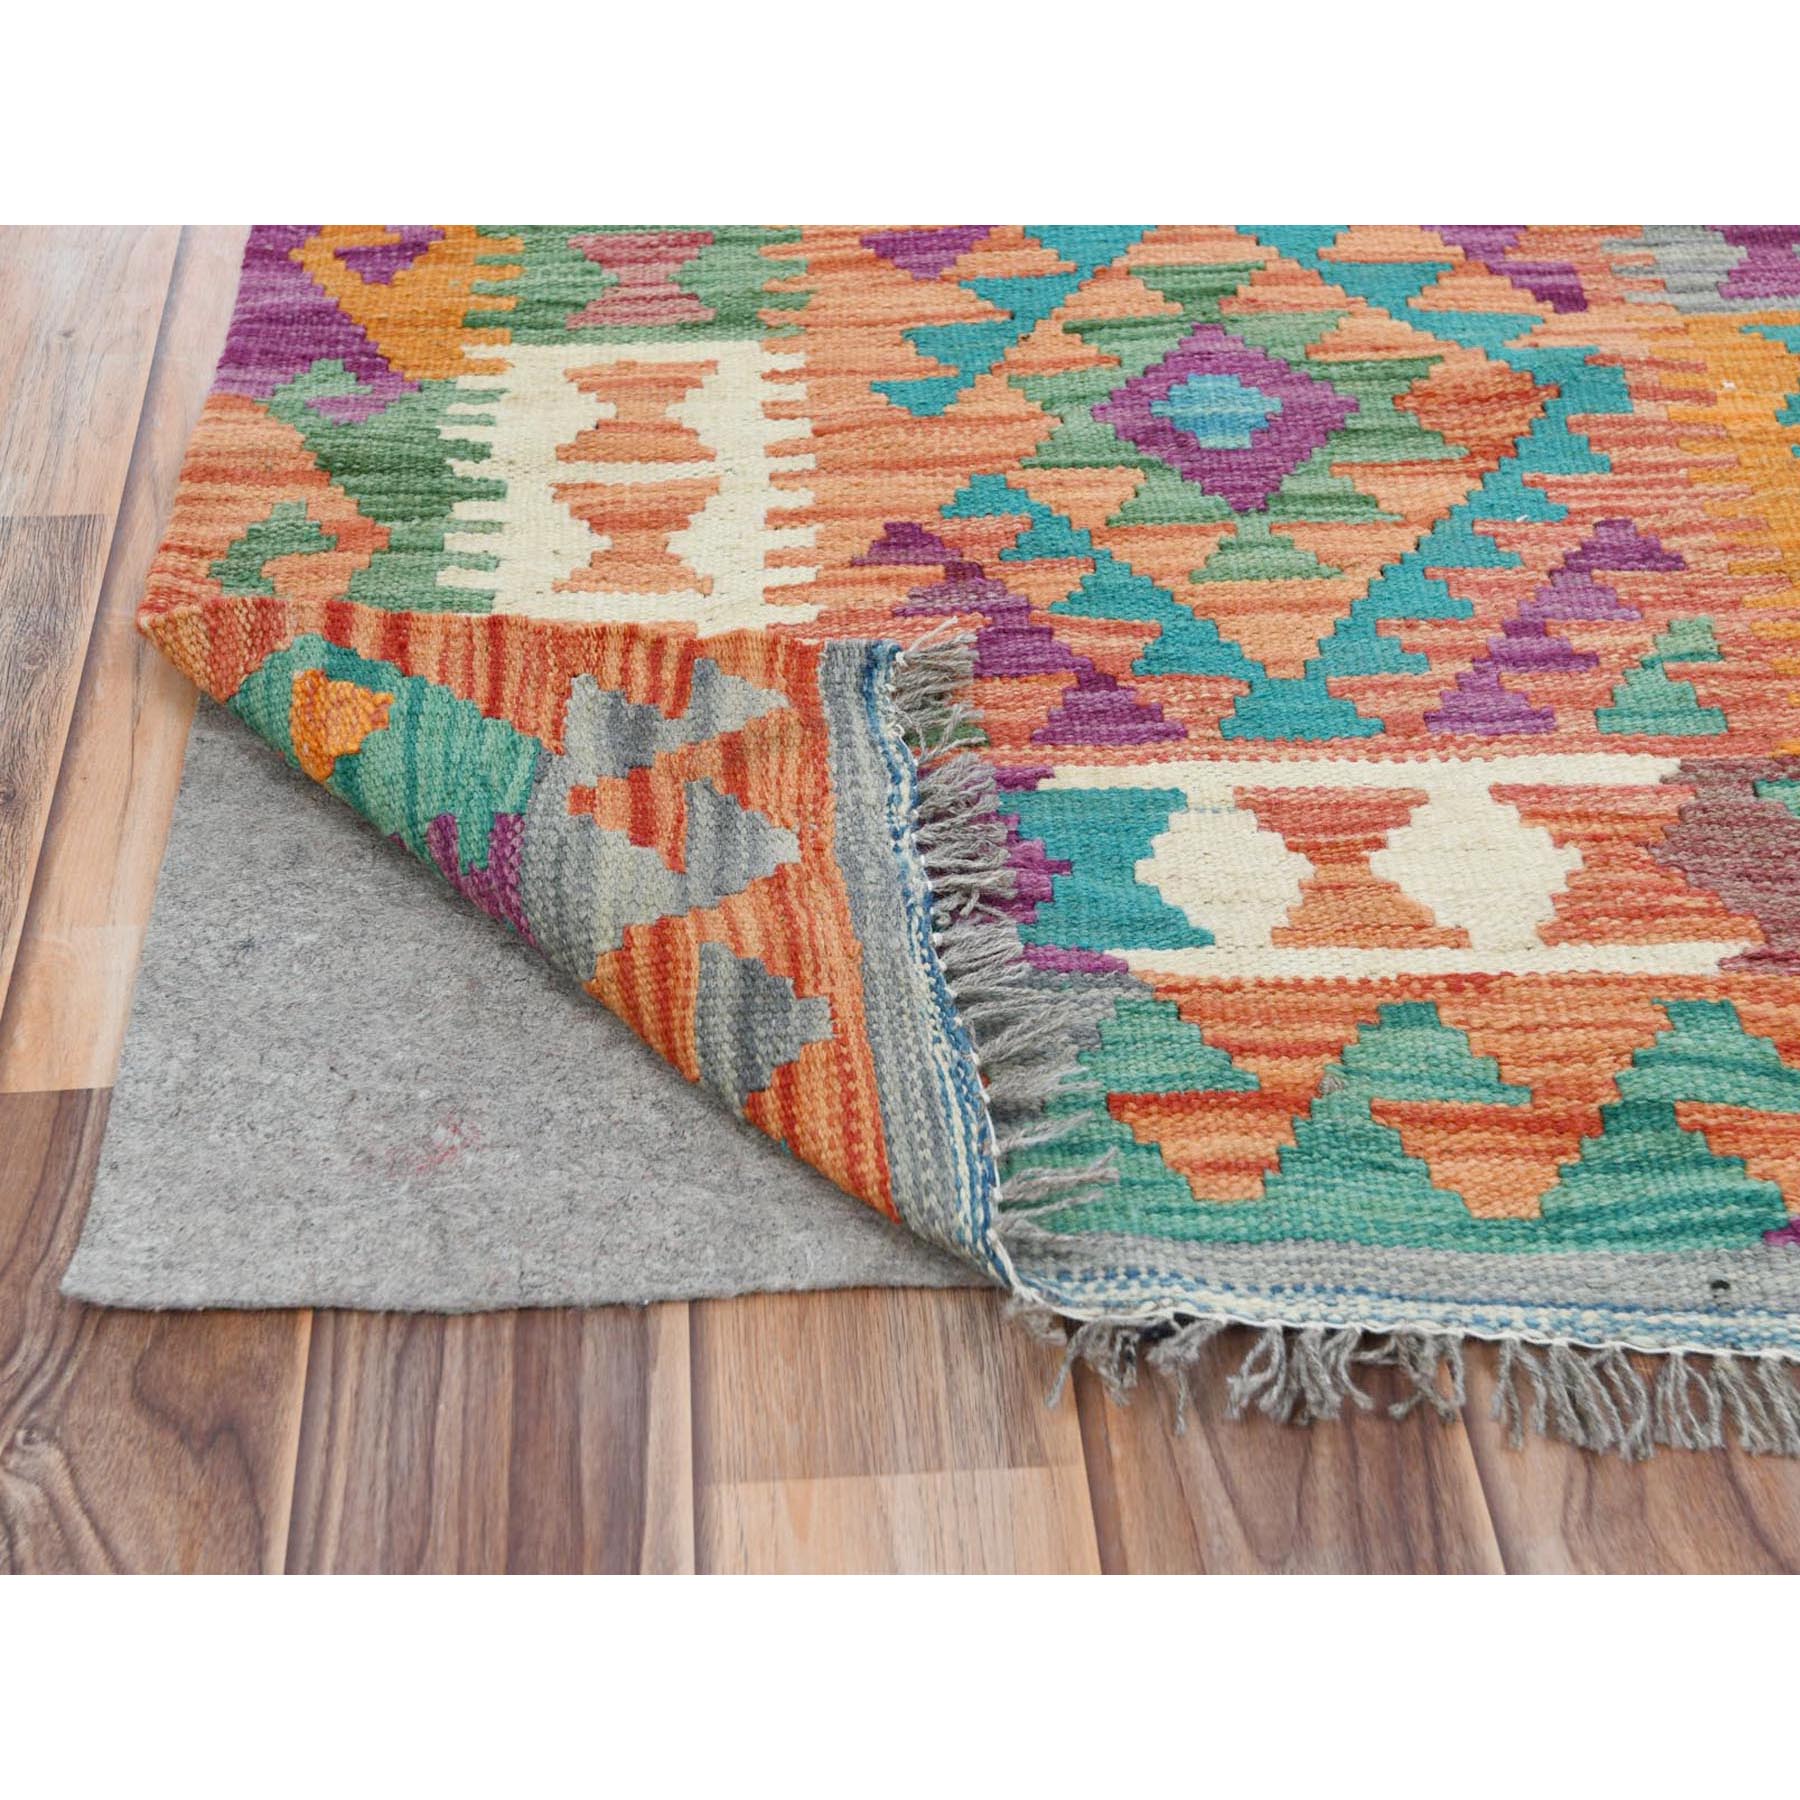 2'6"x16'2" Colorful, Afghan Kilim with Geometric Design, Pure Wool, Hand Woven, Vegetable Dyes, Flat Weave, Reversible XL Runner Oriental Rug 